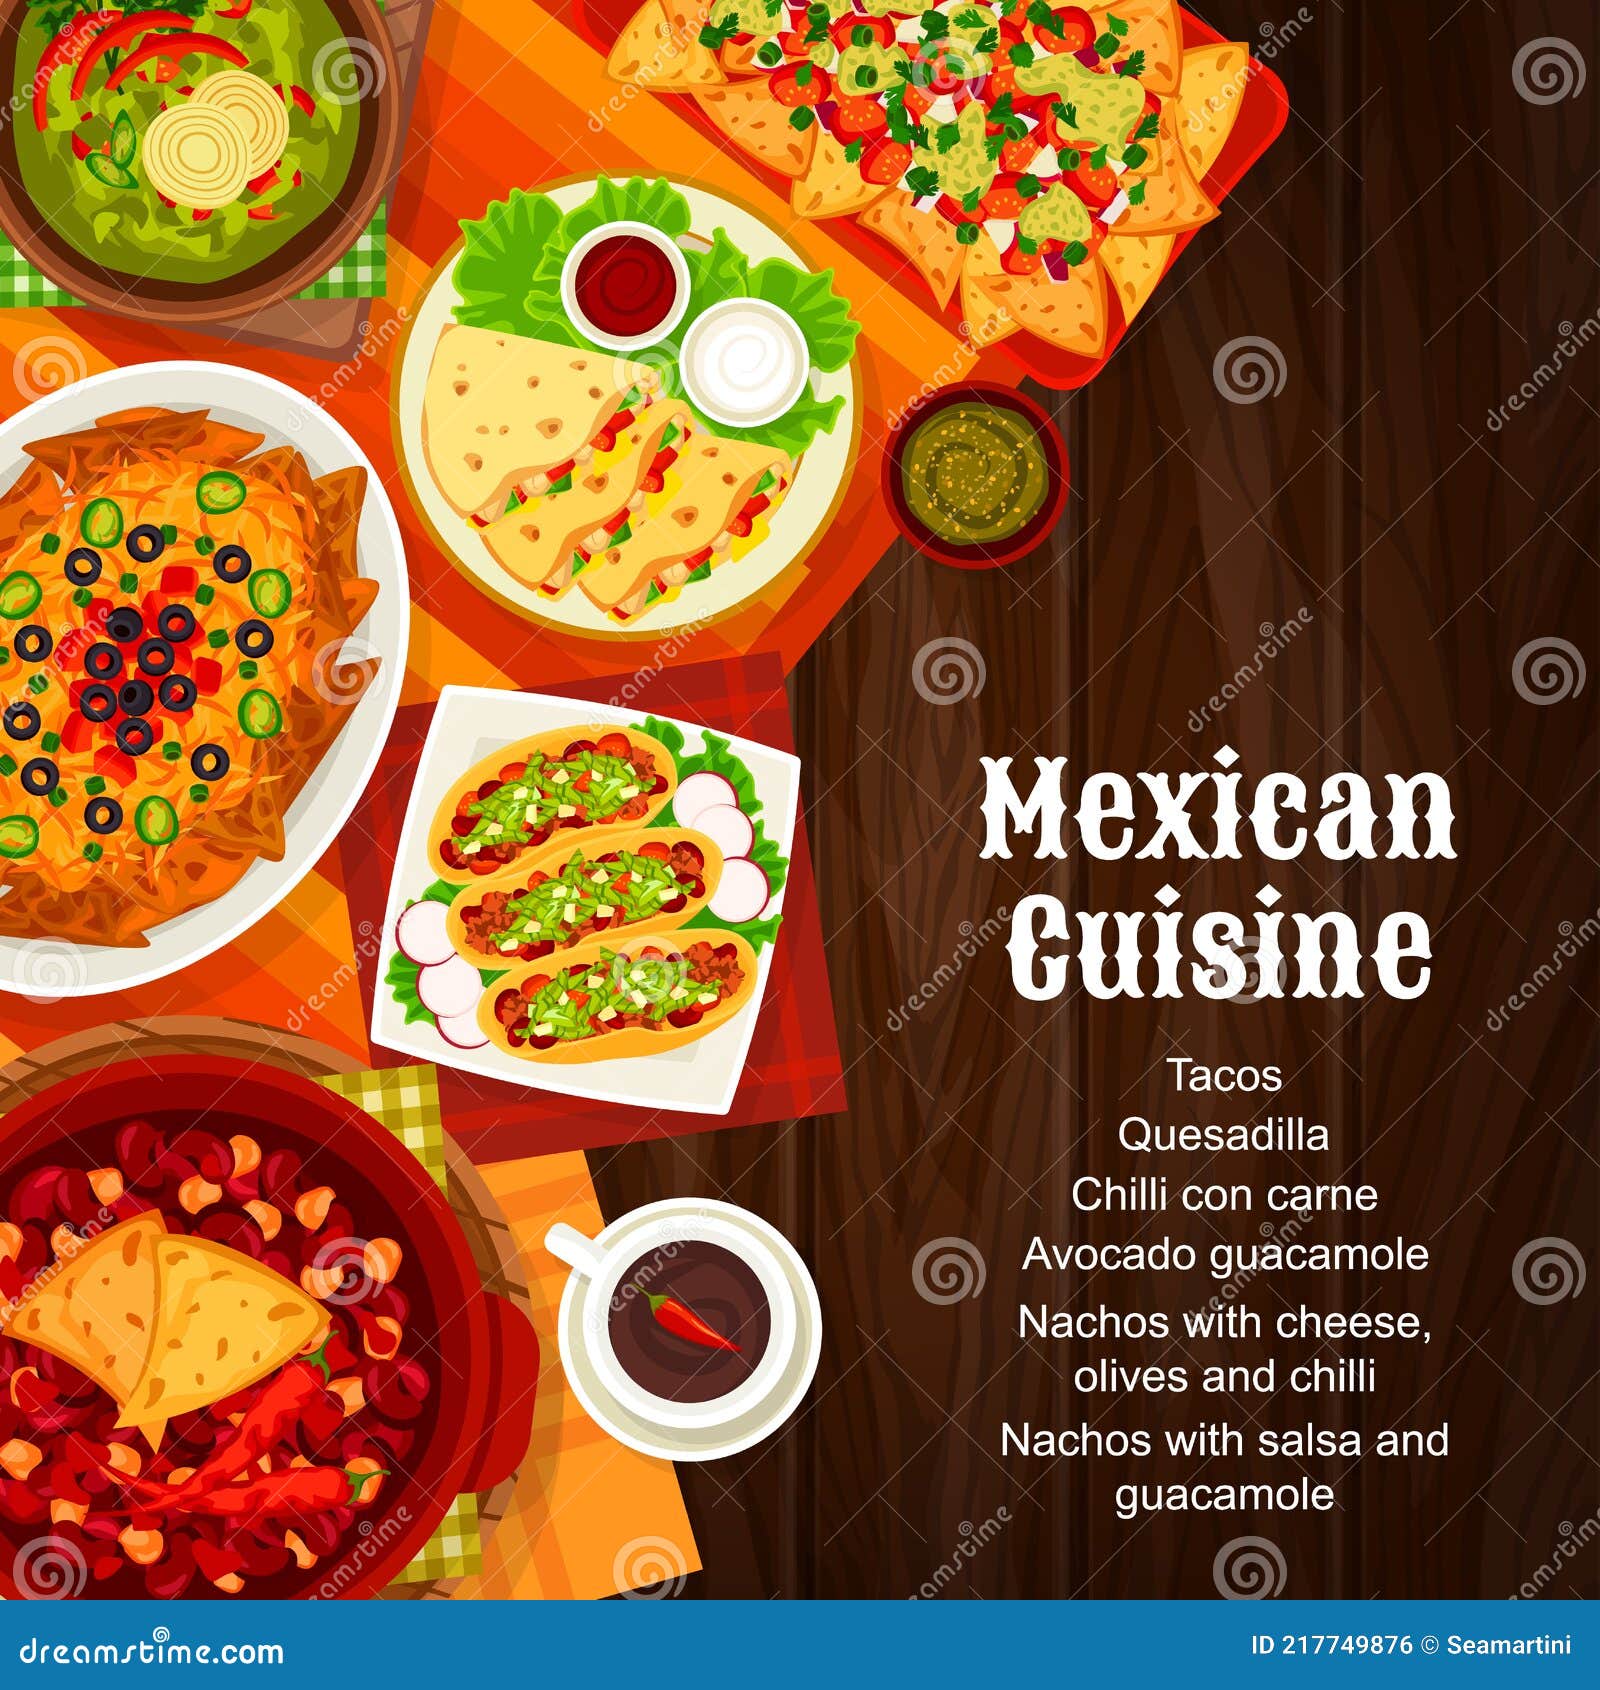 Mexican Food Menu Cover, Mexico Cuisine Dishes Stock Vector ...